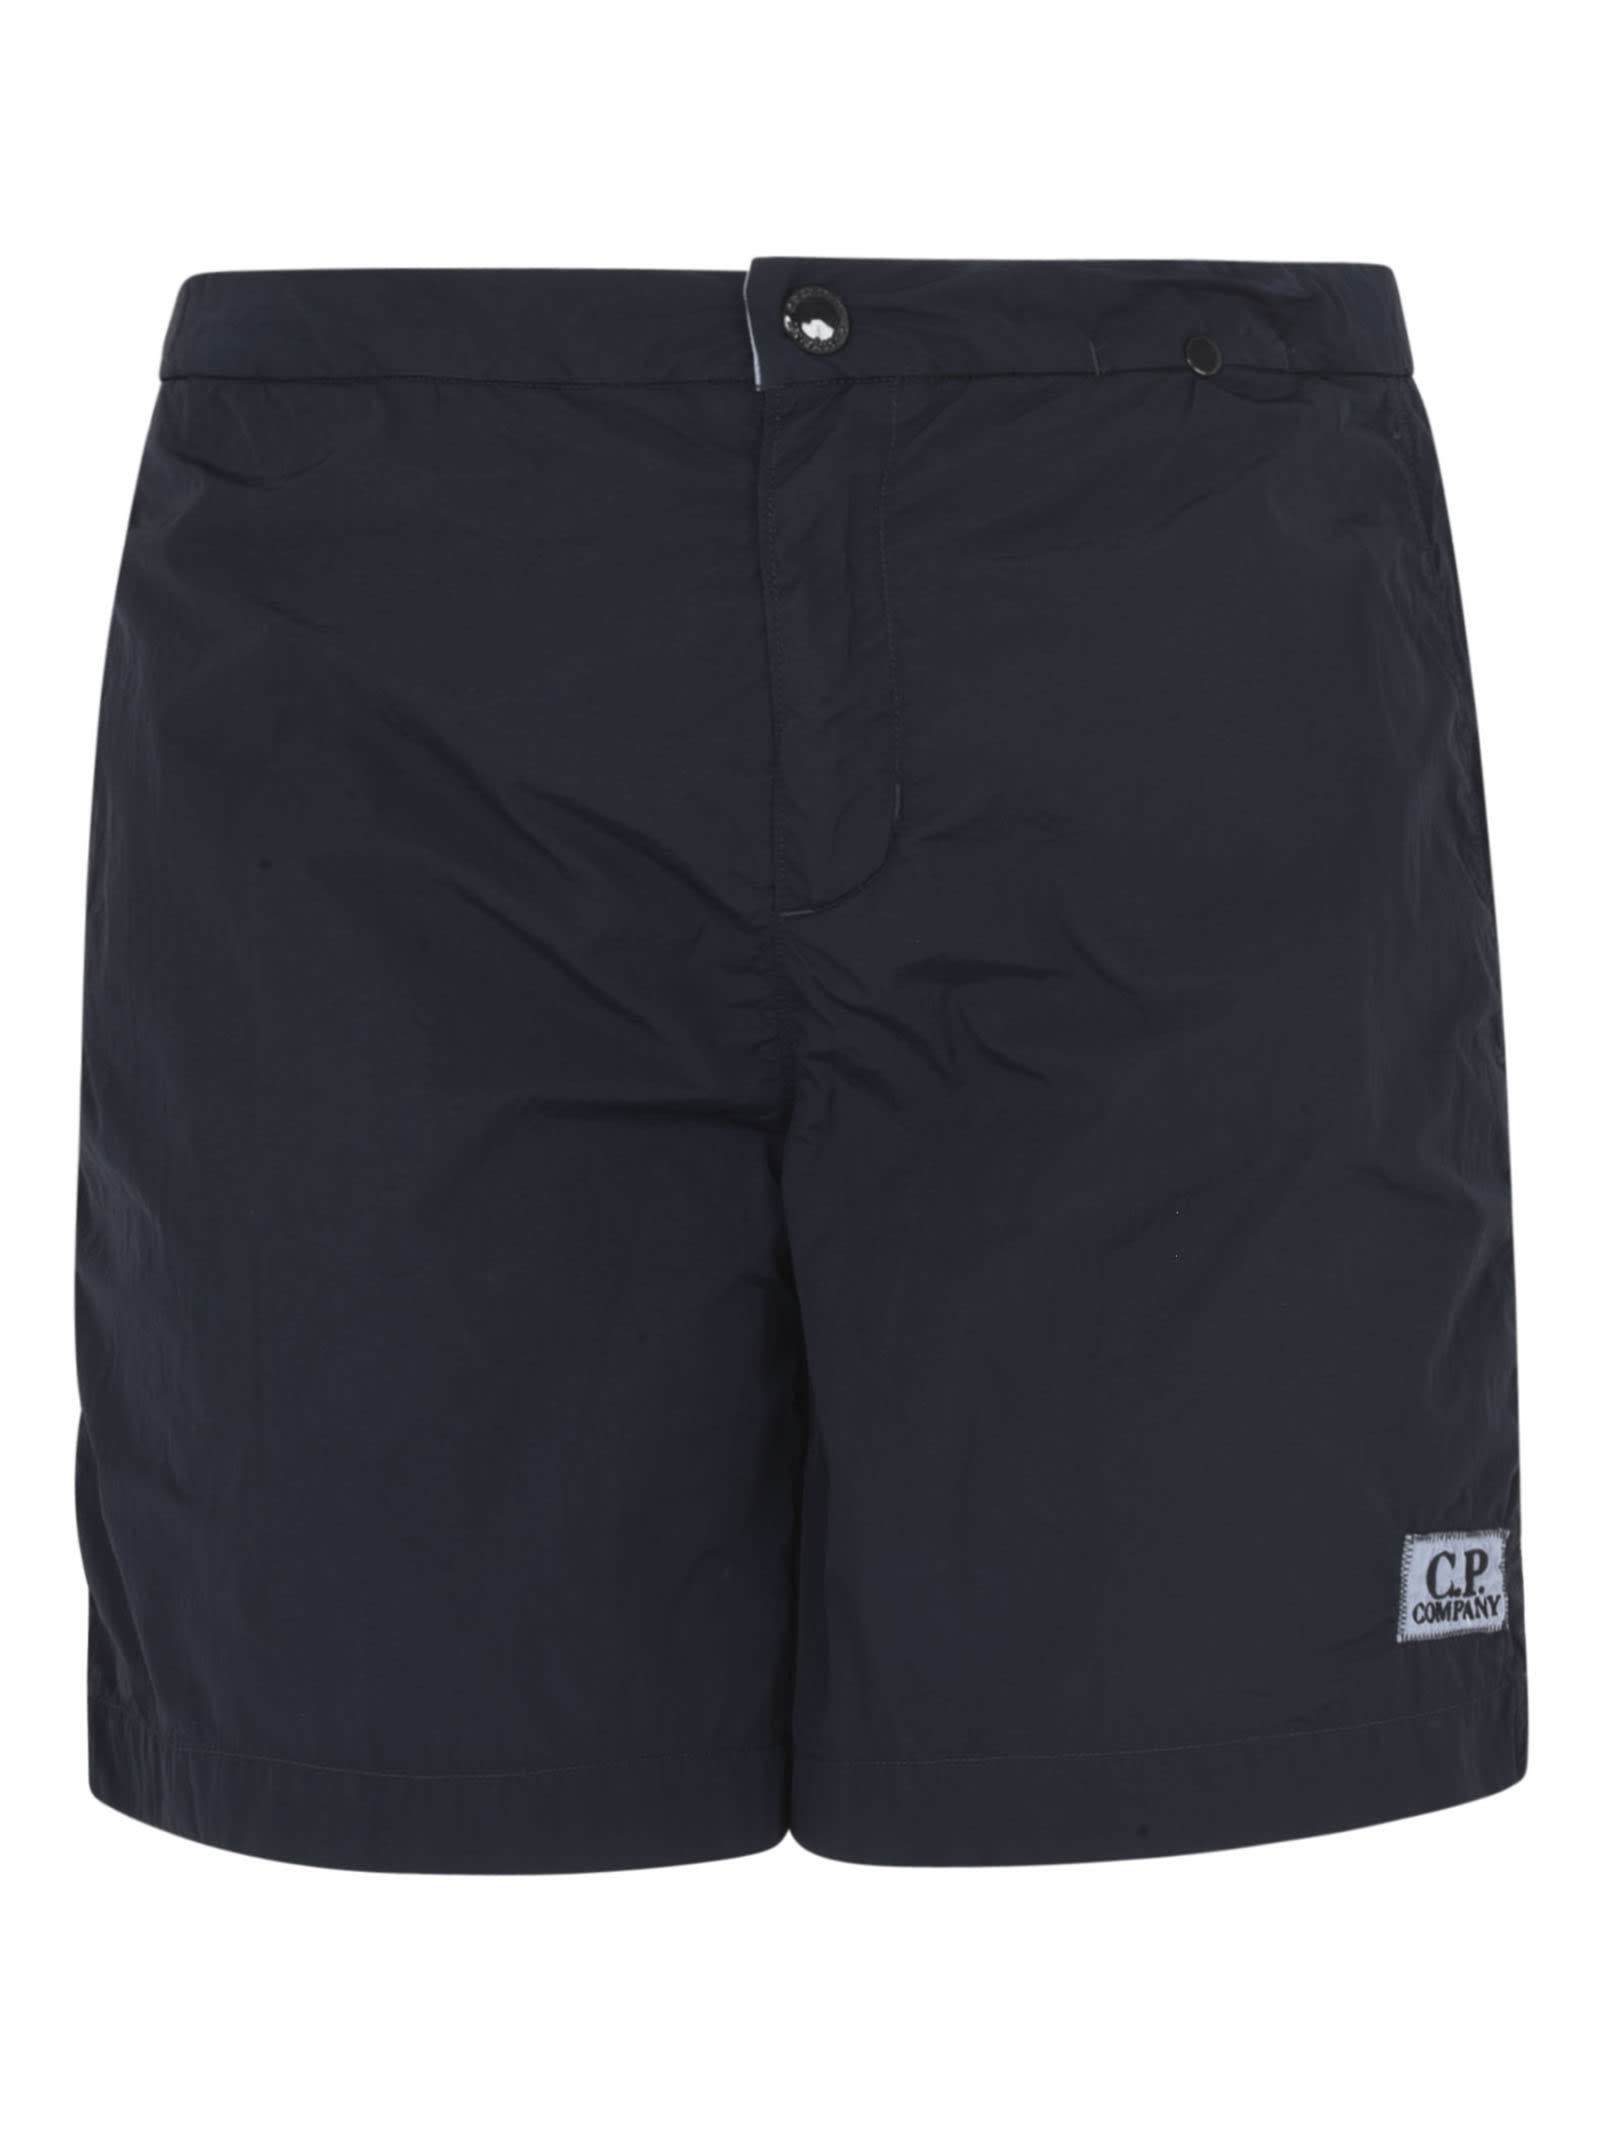 C.P. Company Logo Patched Boxer Shorts